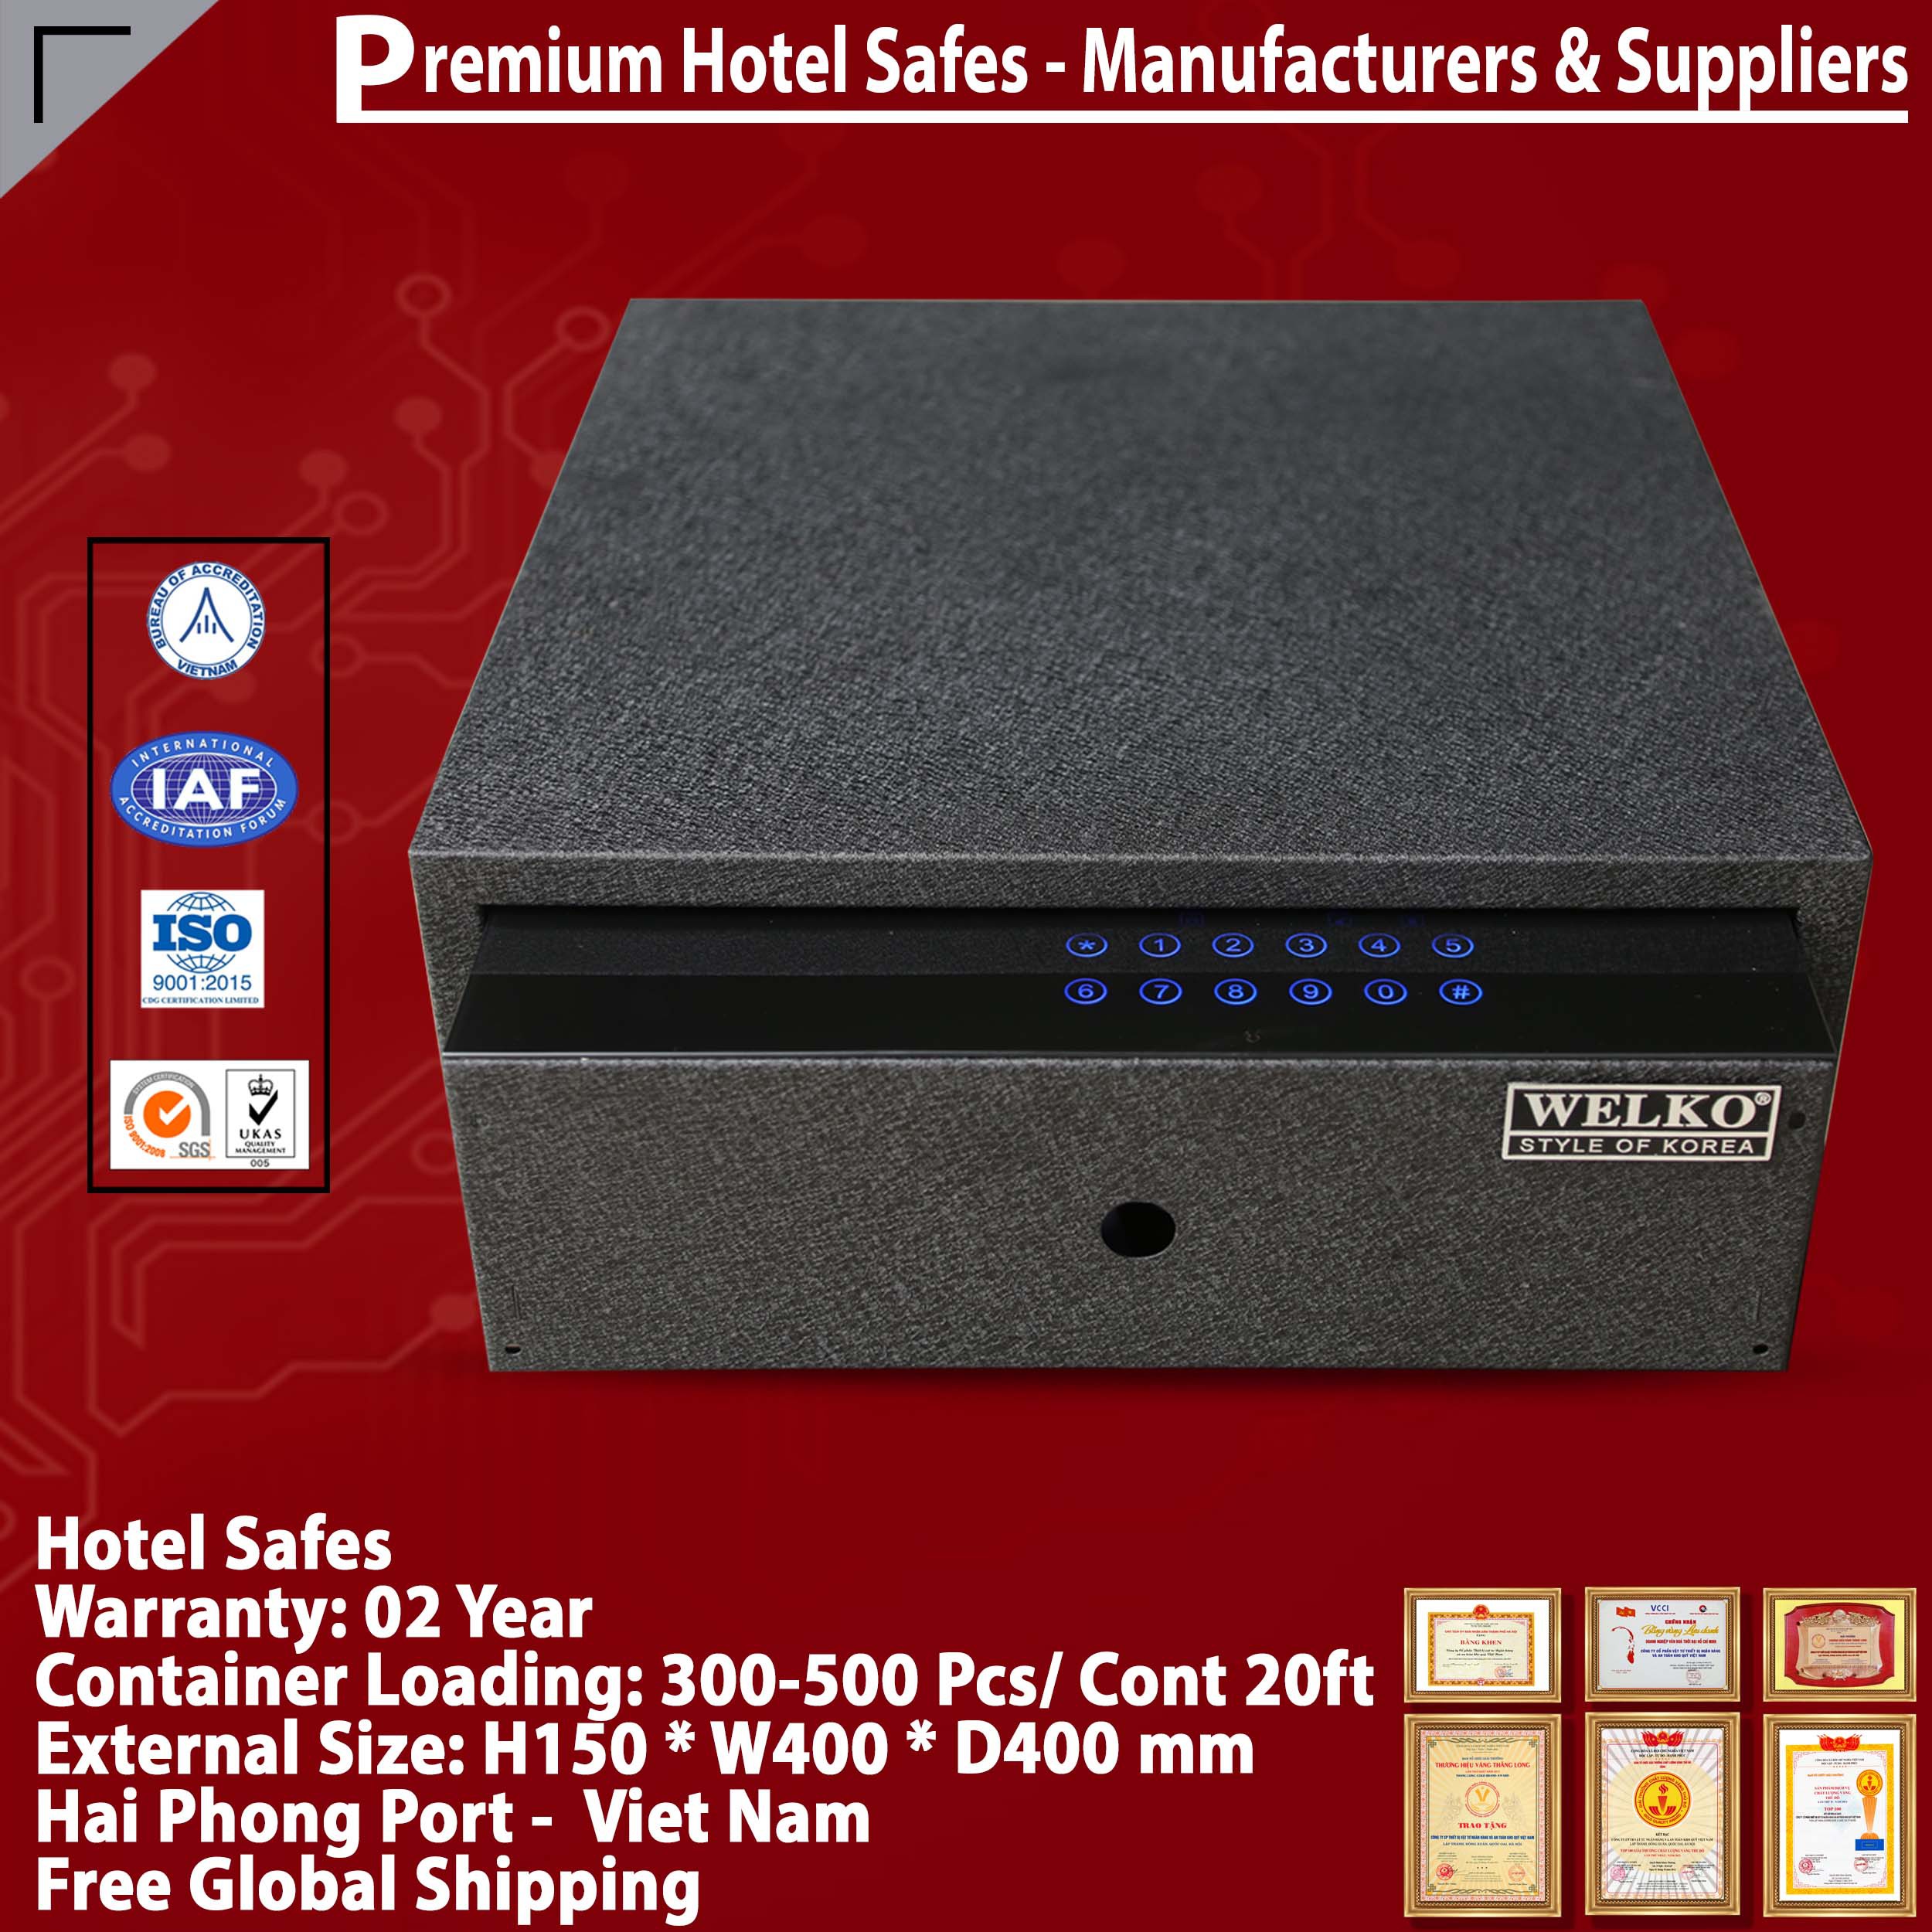 Safe in Hotel Manufacturing Facility